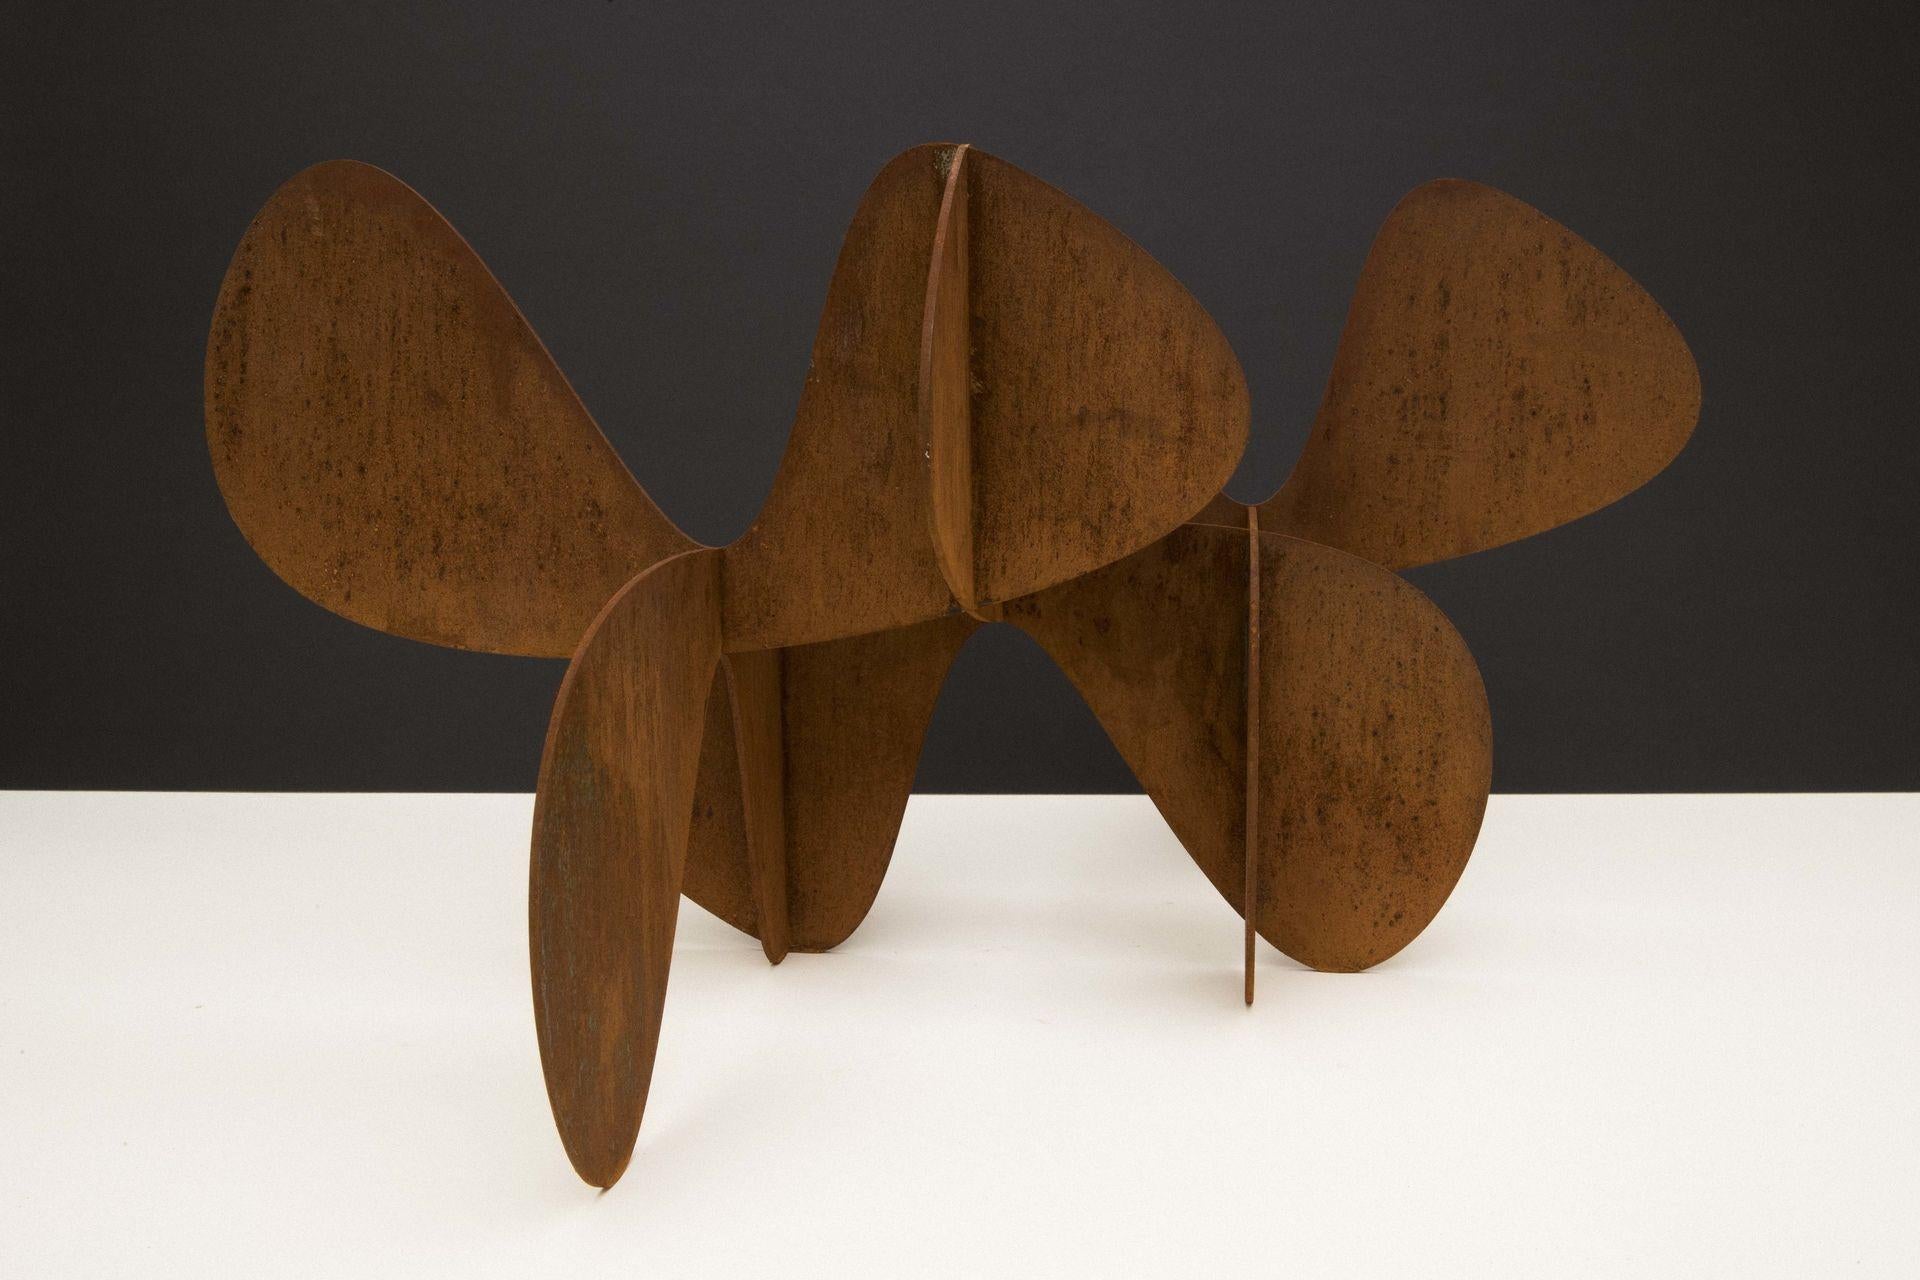 Barricada #1 ac S - Abstract Bronze Sculpture, organic forms - Brown Abstract Sculpture by Alejandro Vega Beuvrin